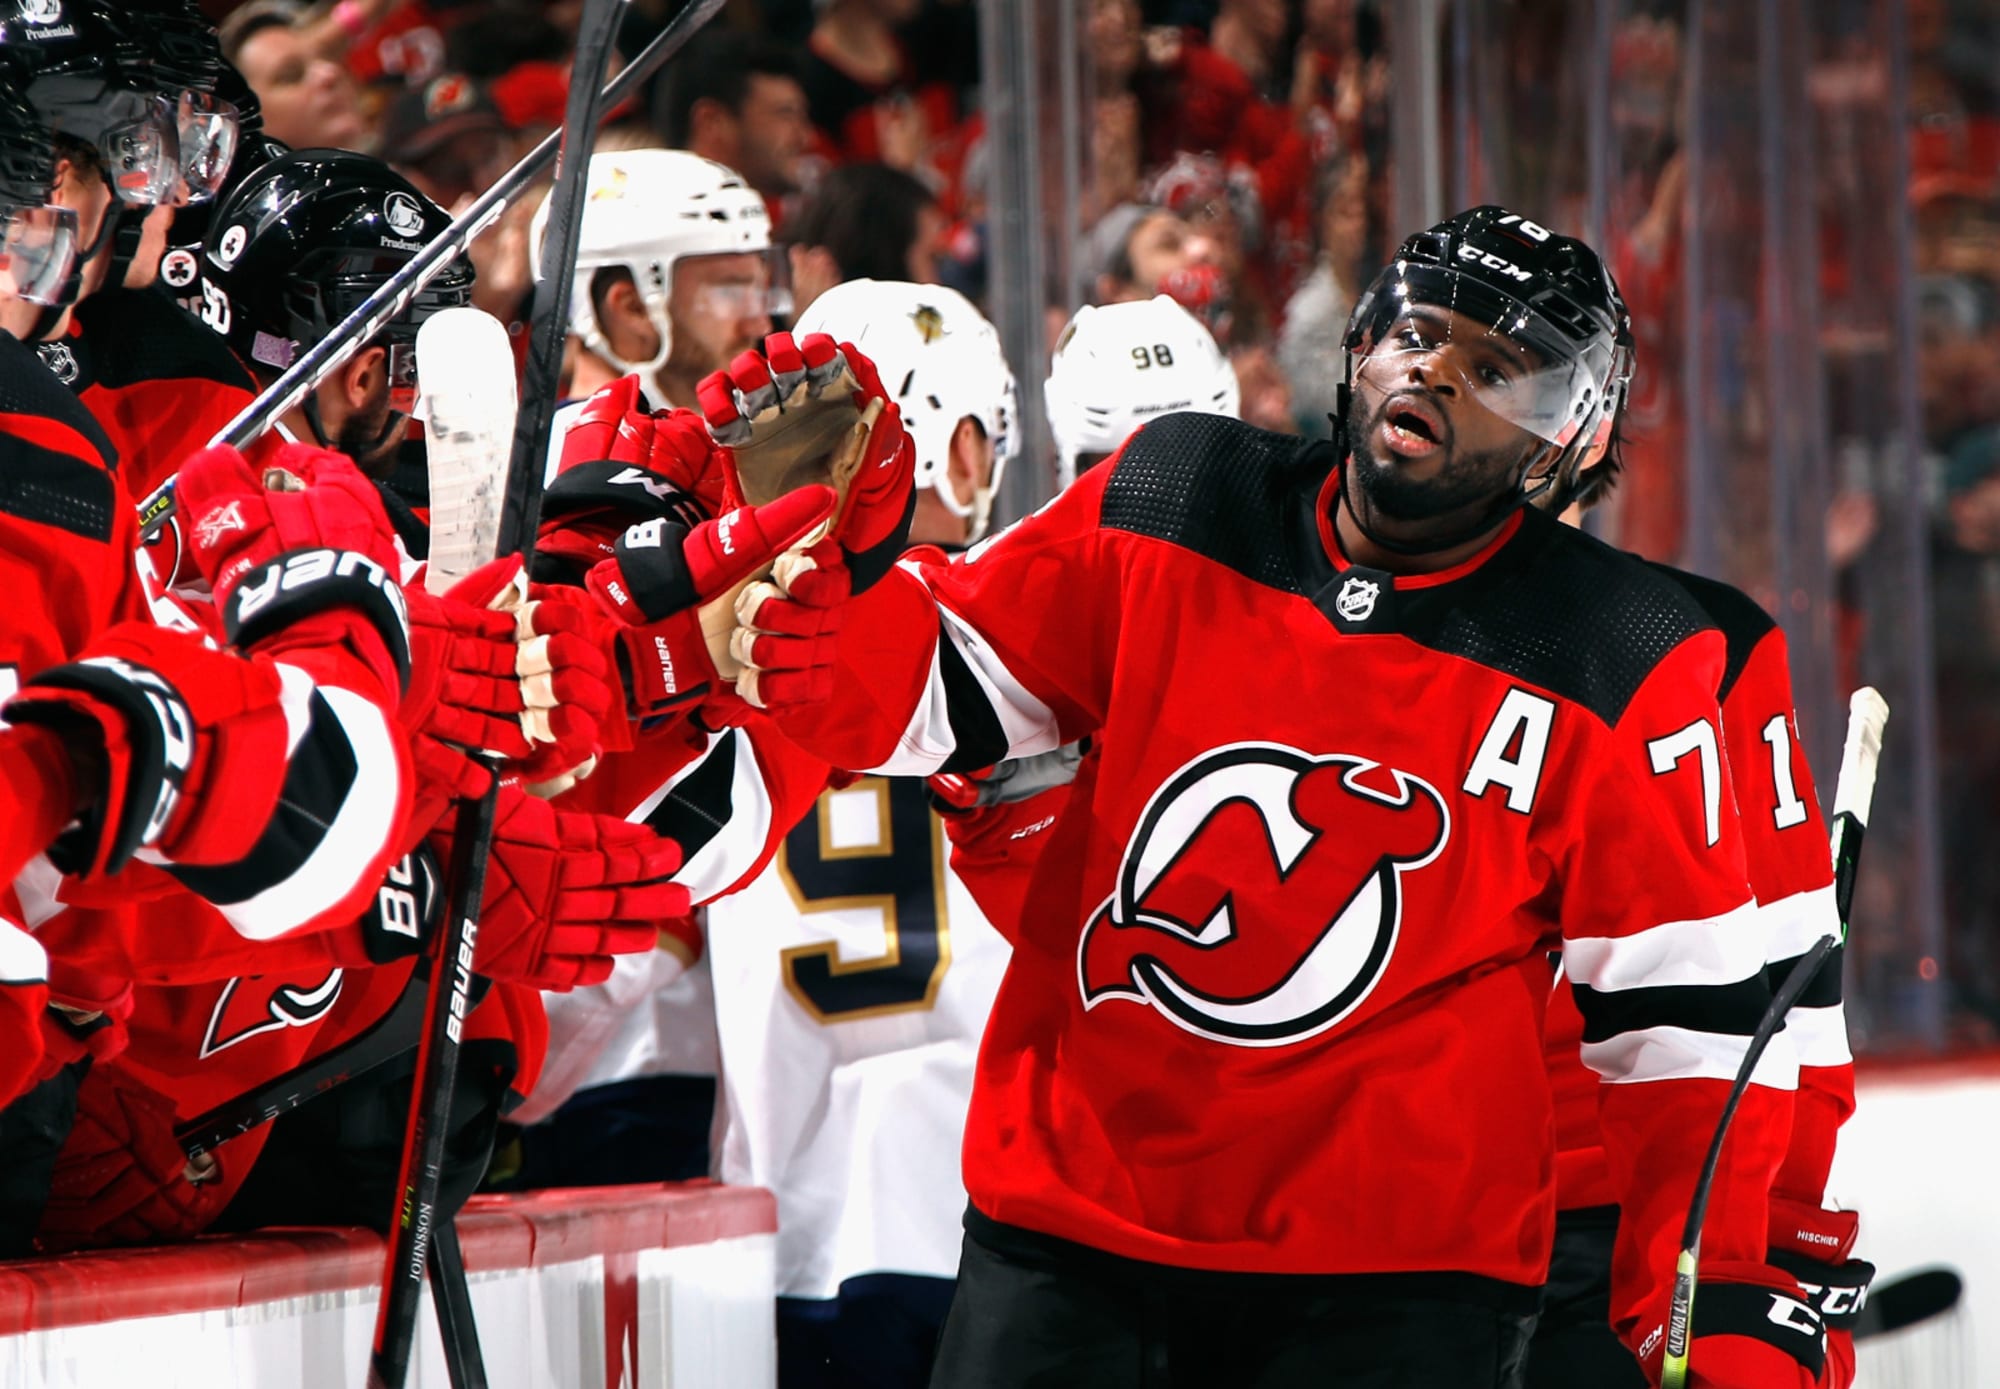 P.K. Subban can still help the New Jersey Devils in 2020-21